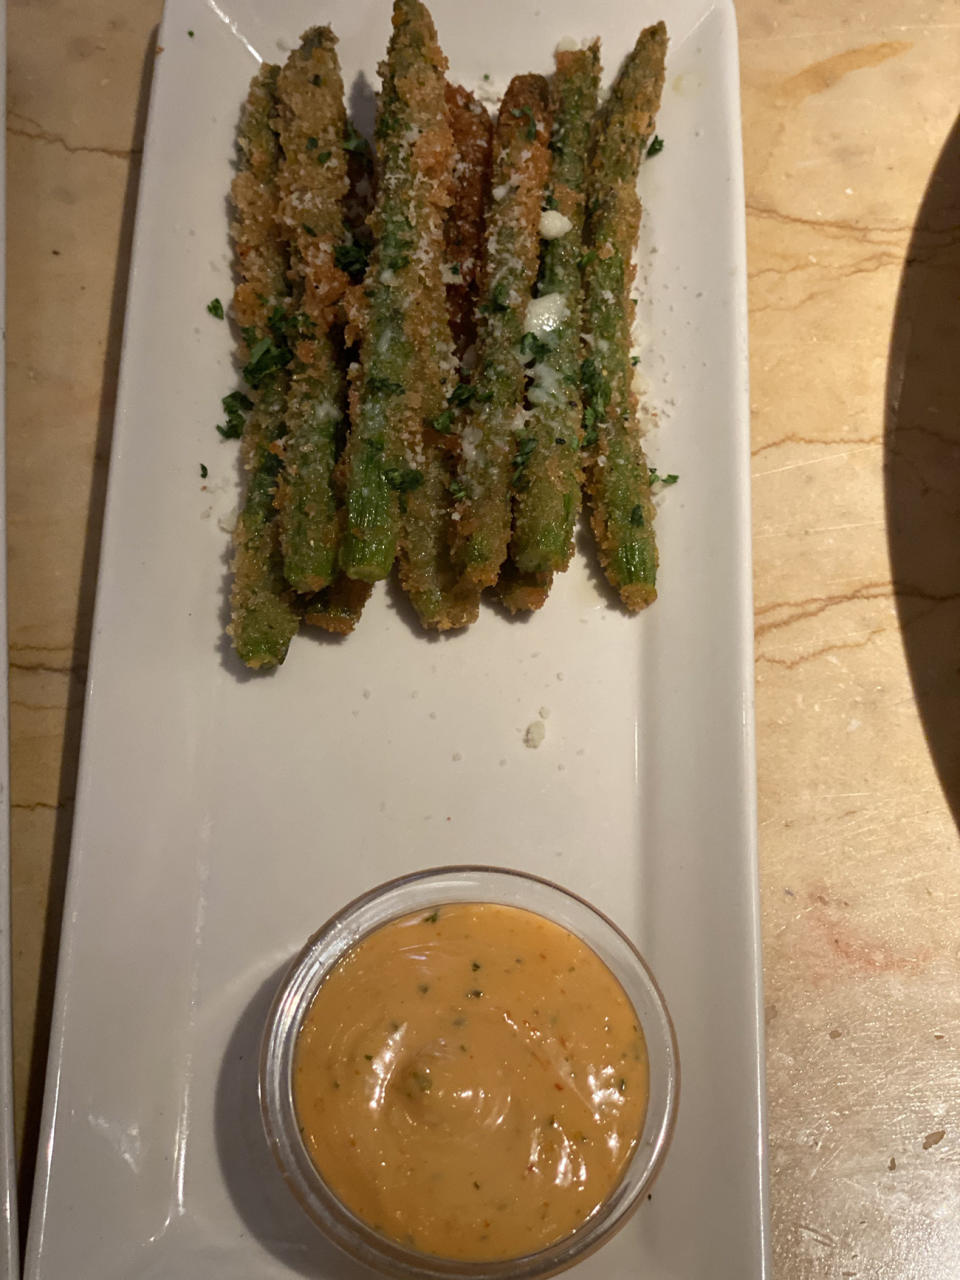 CHRIS: Asparagus? Very good. Asparagus in fried crumble with some sort of magical, savory dipping sauce? Very, very good. Yet another home run. 9/10.KRISTA: The dip for this is a HELL YEAH. The breading on this asparagus was perfectly fried and coated and not soggy at all. The parmesan on top added a yummy touch and I really just loved this appetizer a lot. 9/10.